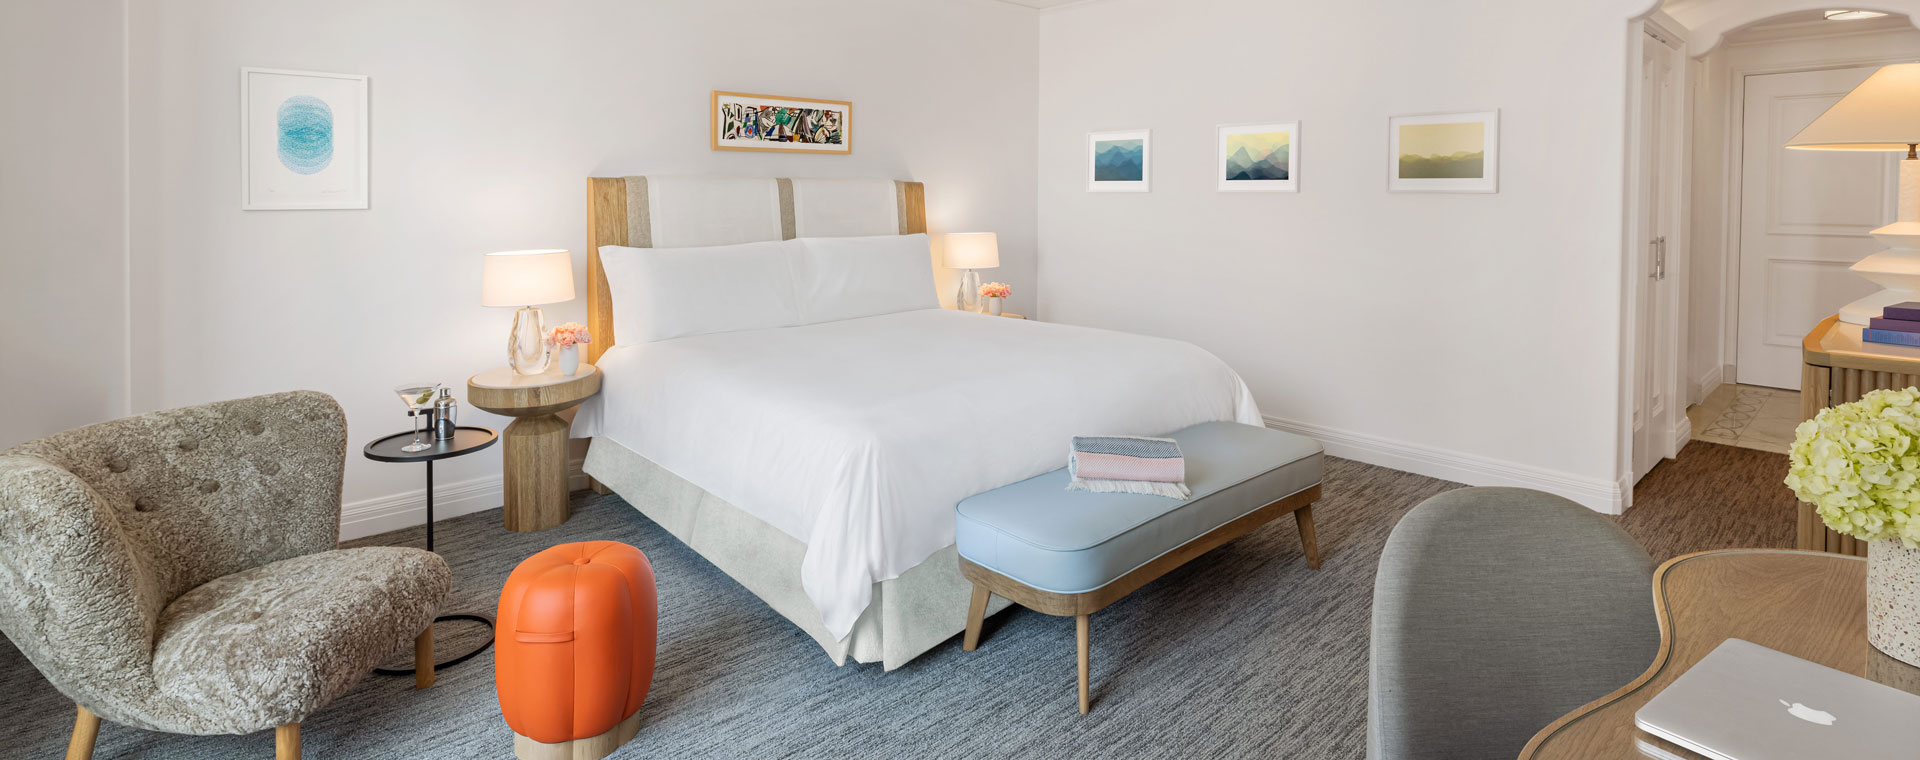 A king sized bed in a hotel room. There is a small grey chair with an orange, pumpkin shaped foot stool.